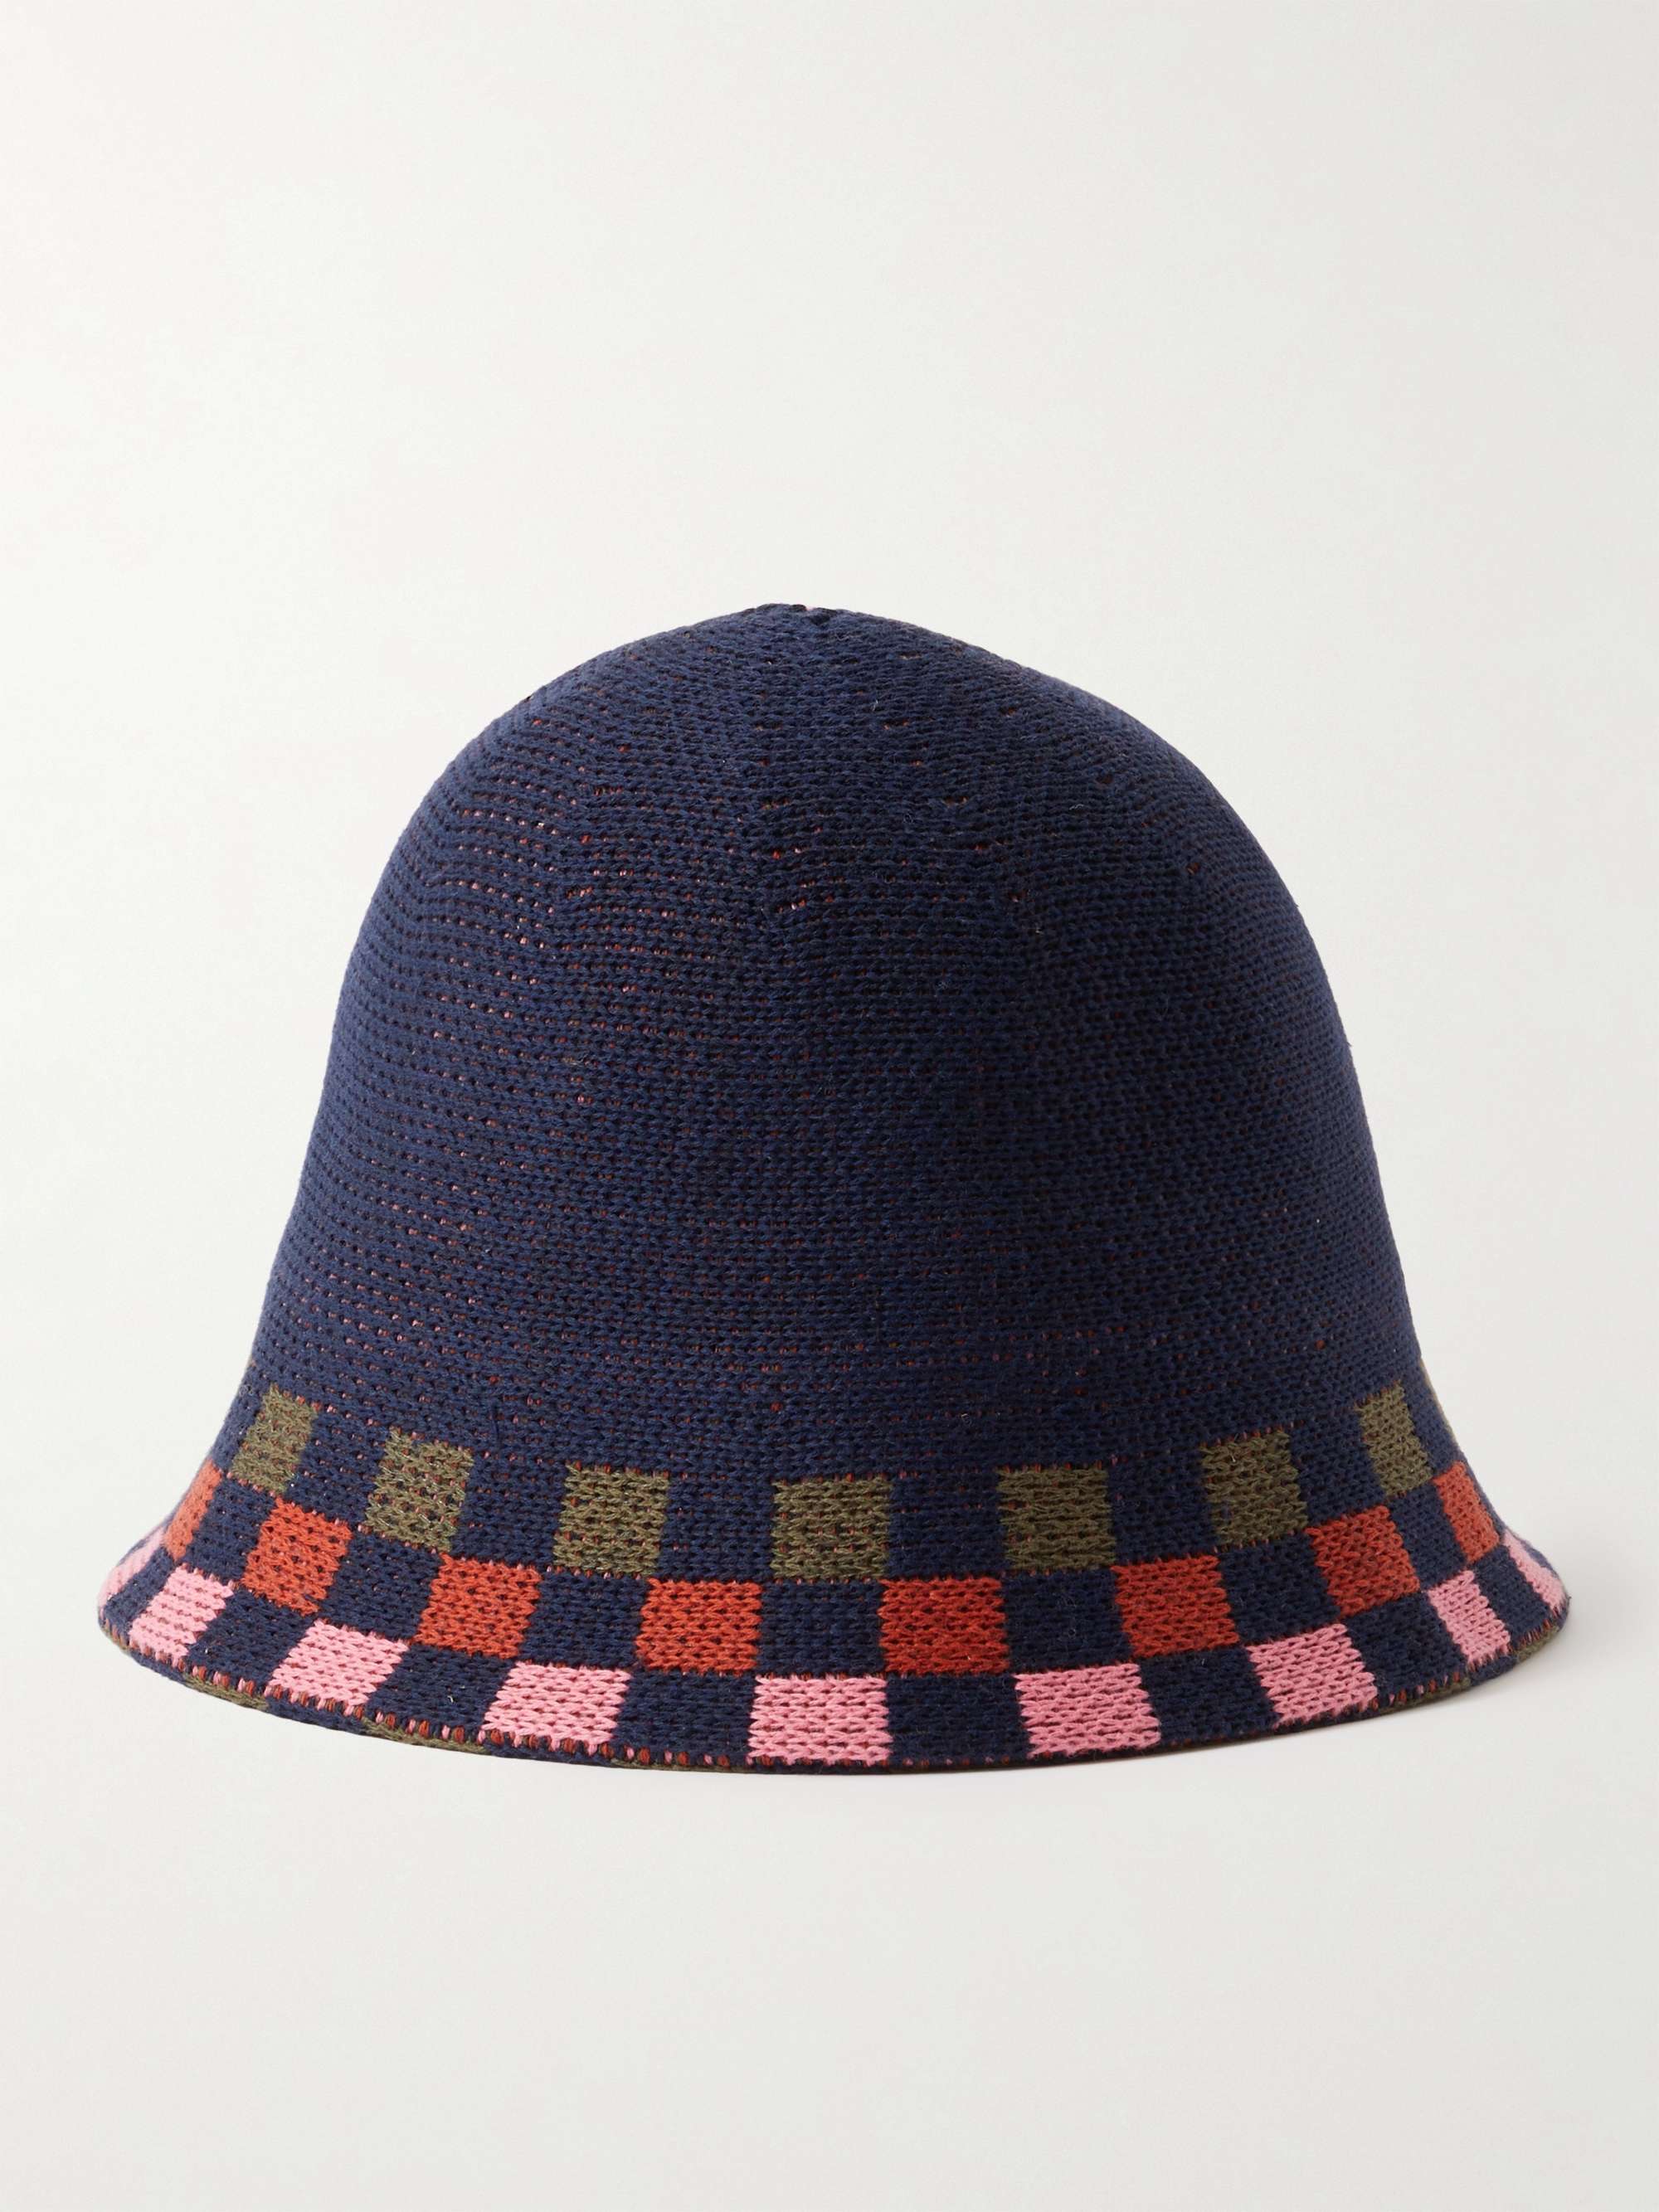 PAUL SMITH Checked Crocheted Bucket Hat